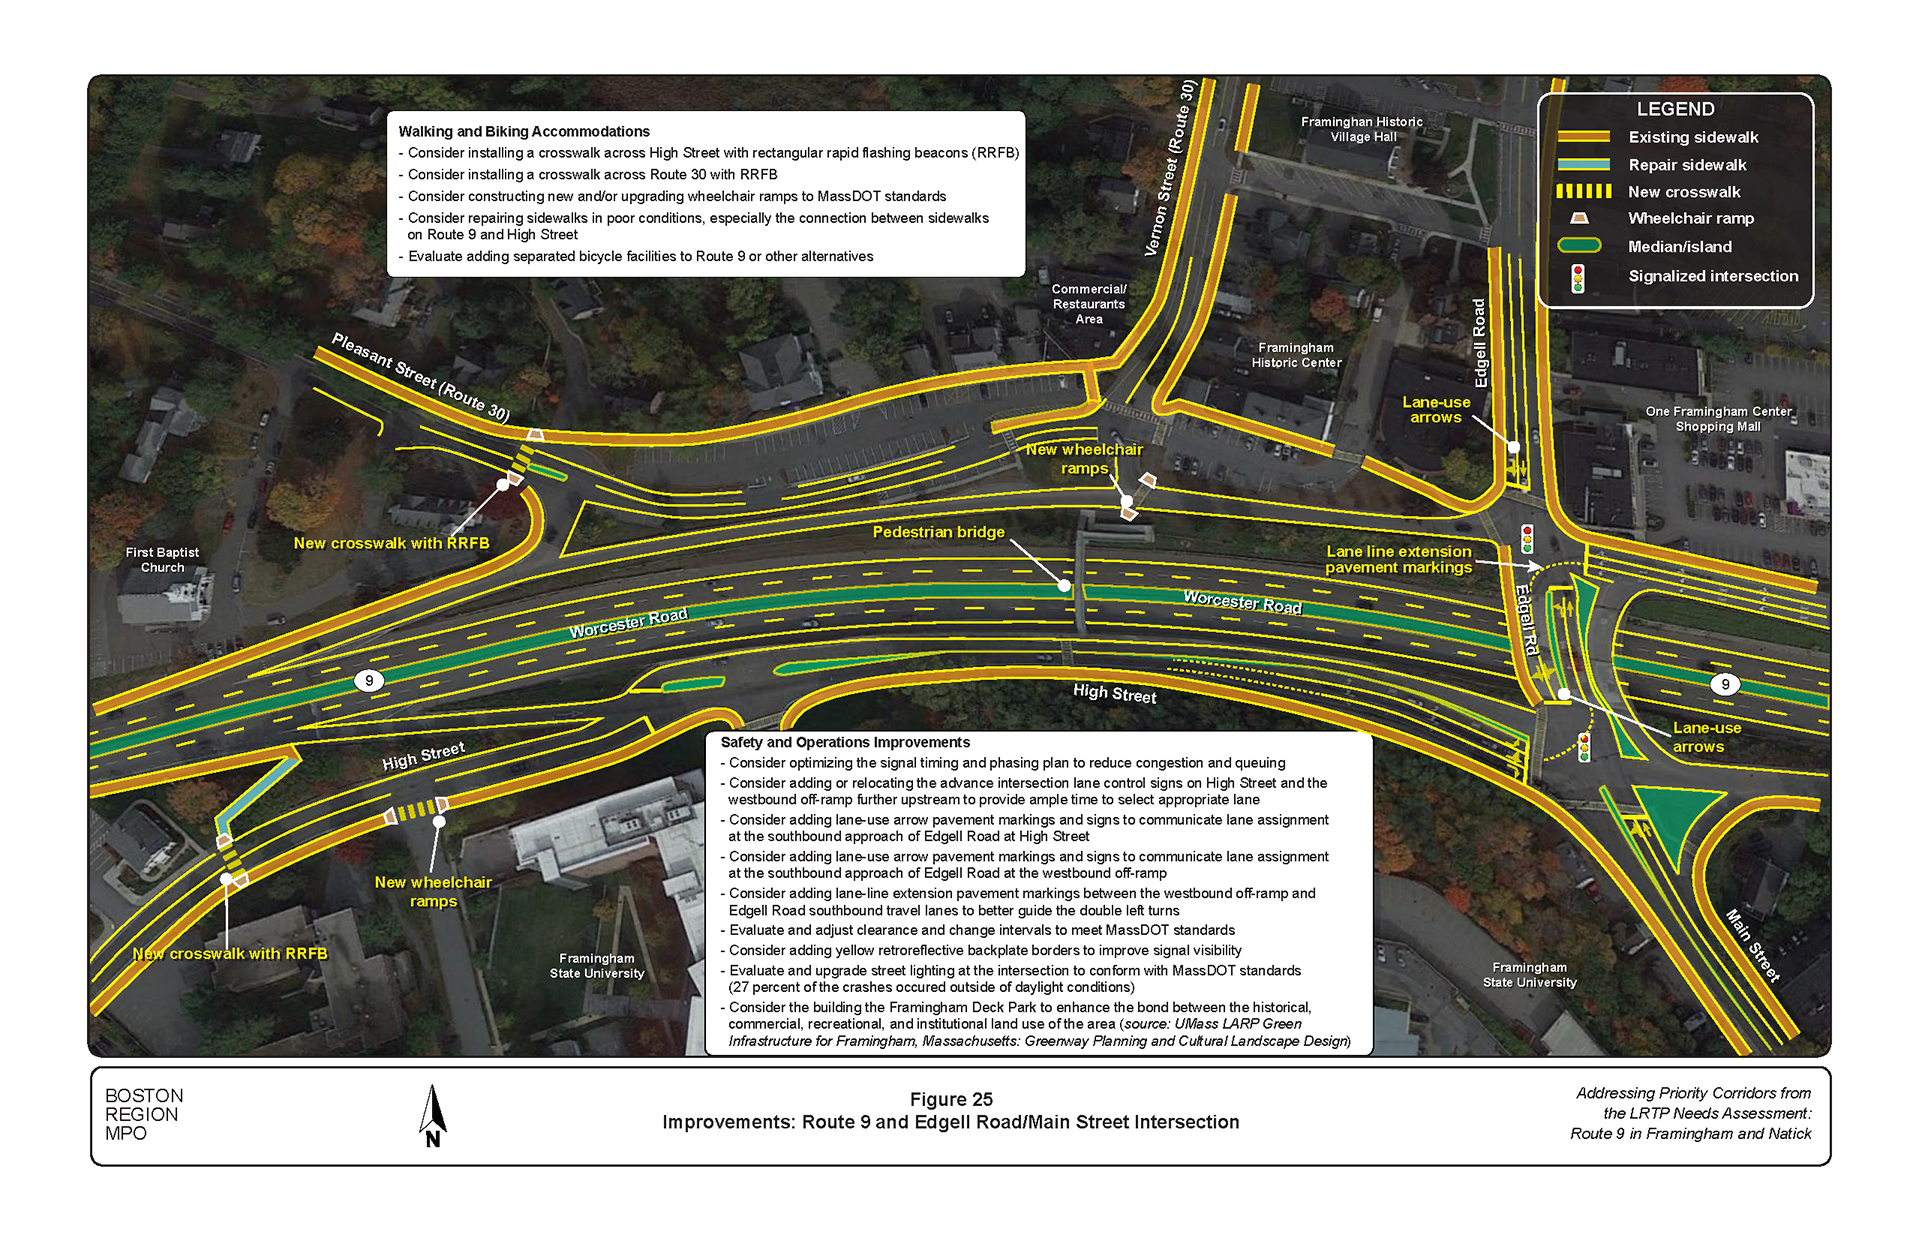 Figure 25 is an aerial photo showing the intersection of Route 9 and Main Street/Edgell Road and the improvements